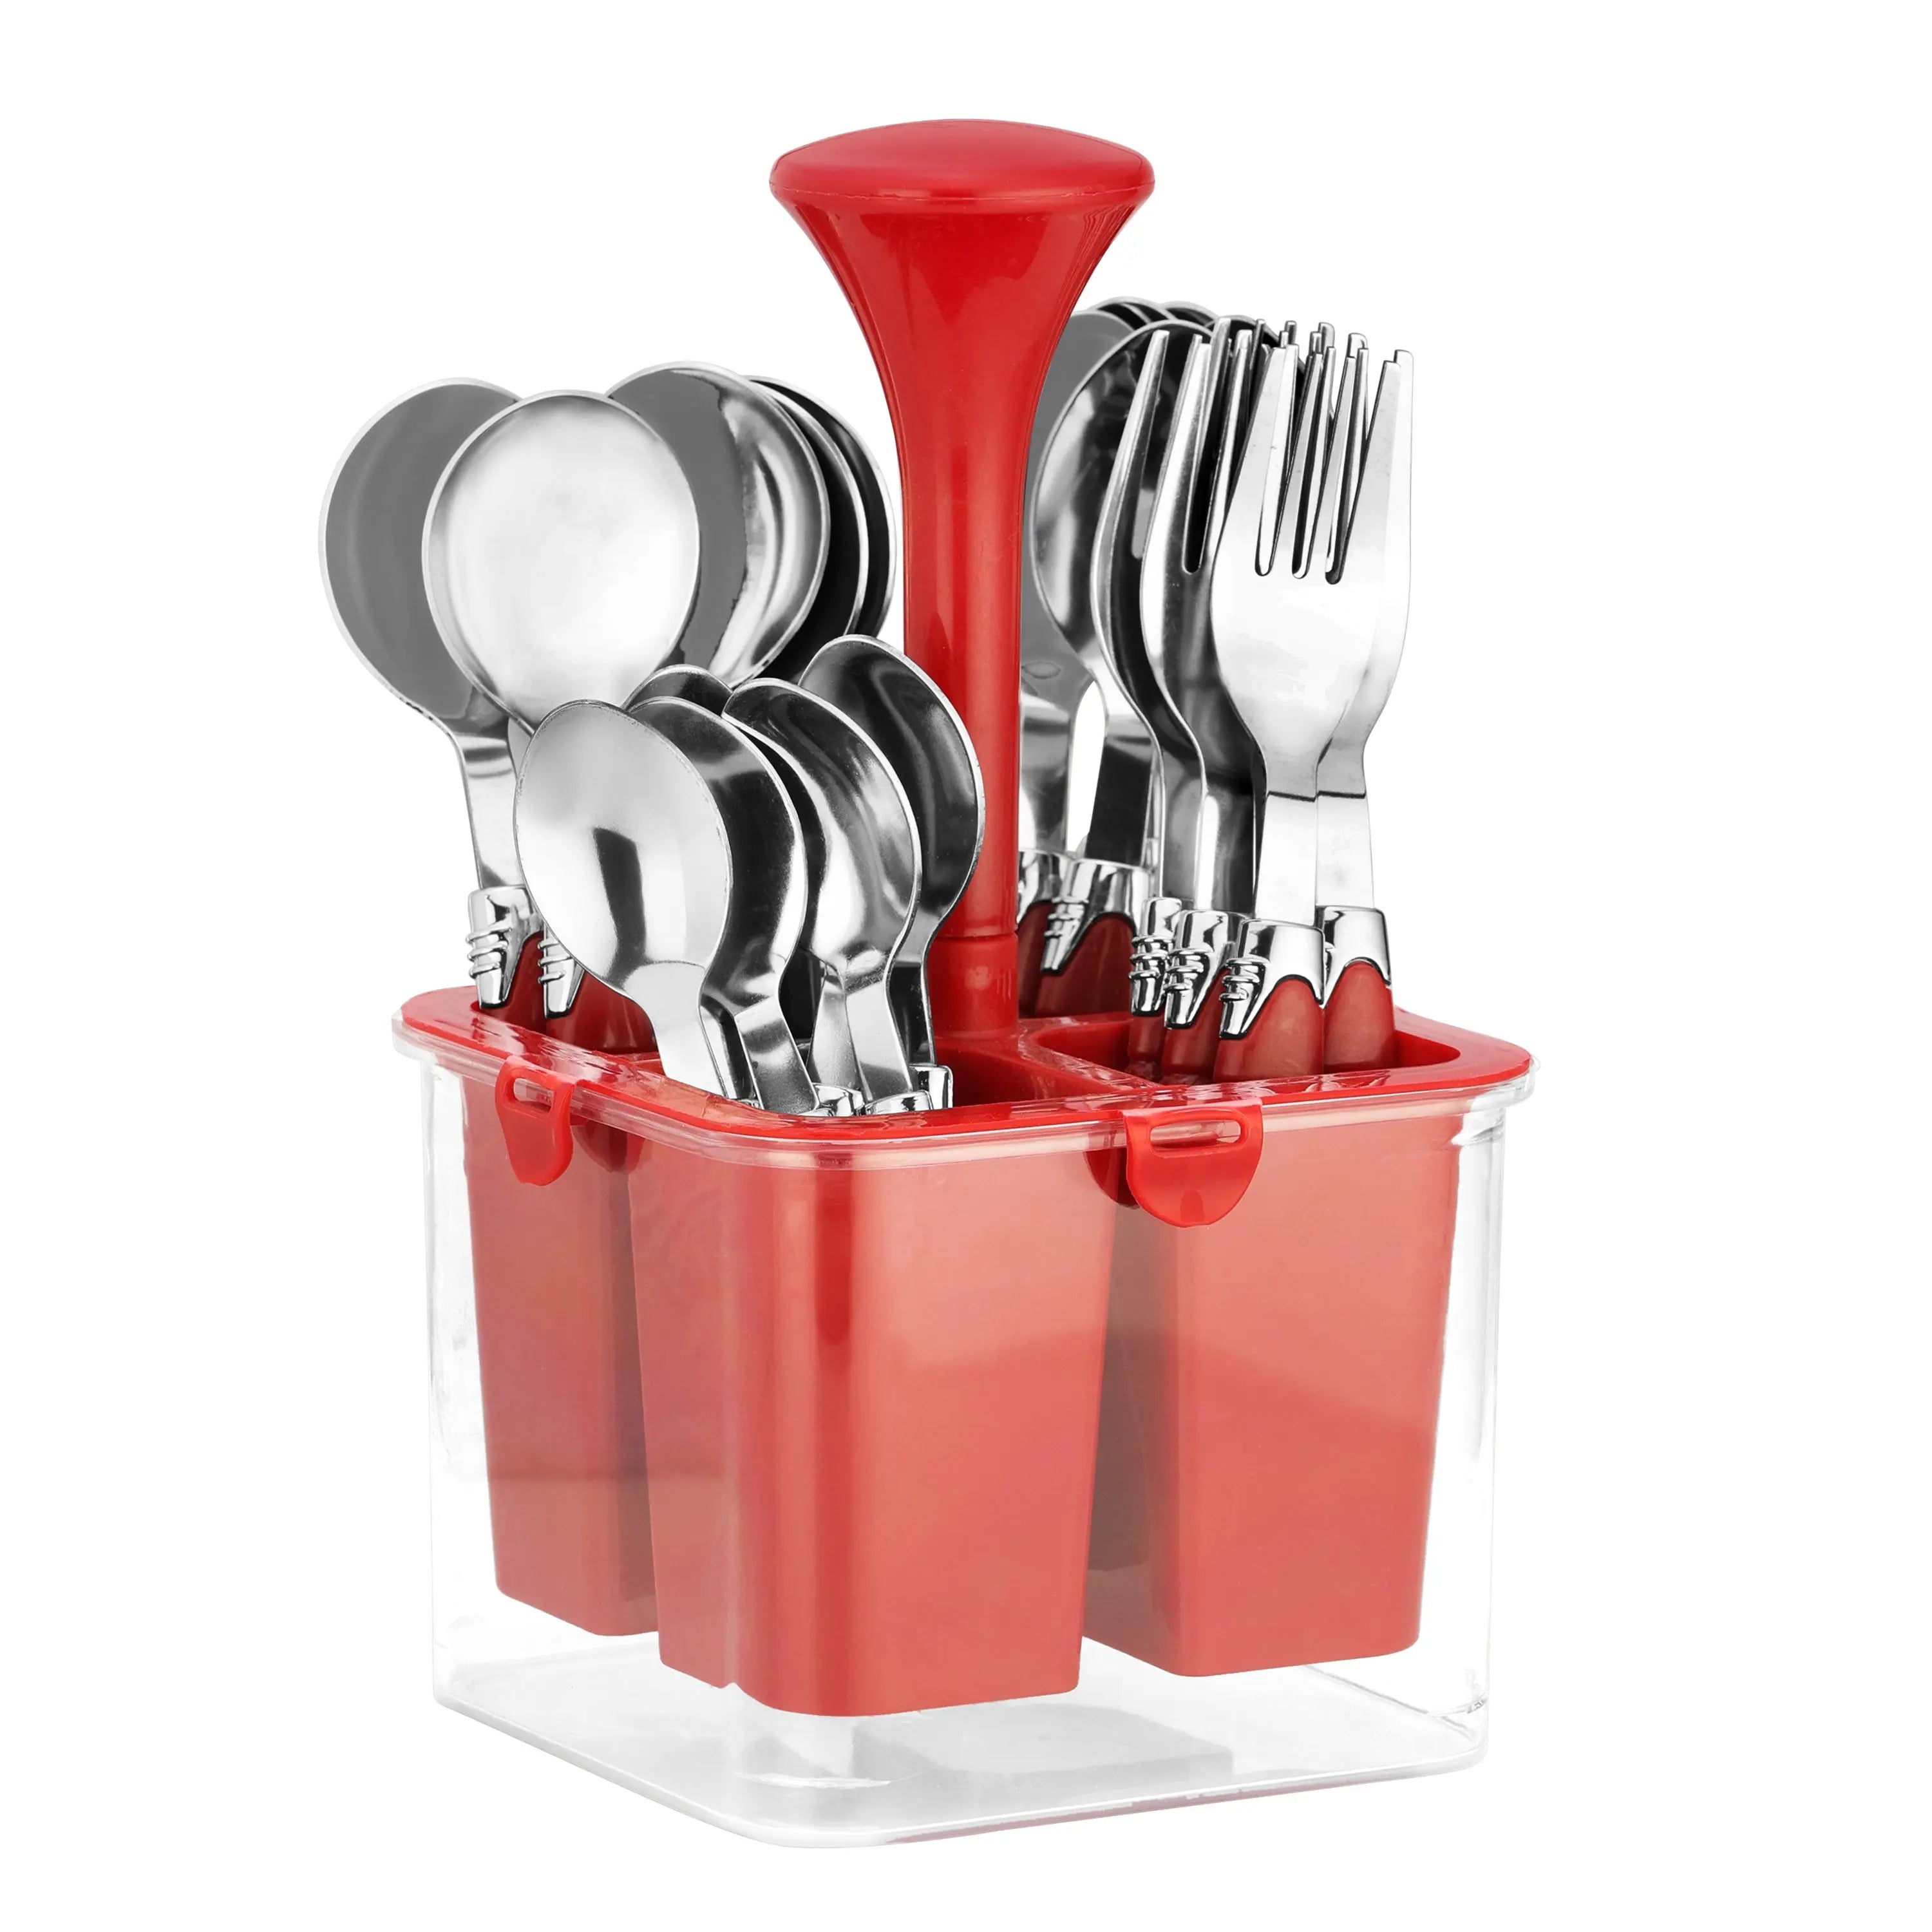 STAINLESS STEEL CUTTLERY CAMRY SET -24 PCS - CROCKERY WALA AND COMPANY 